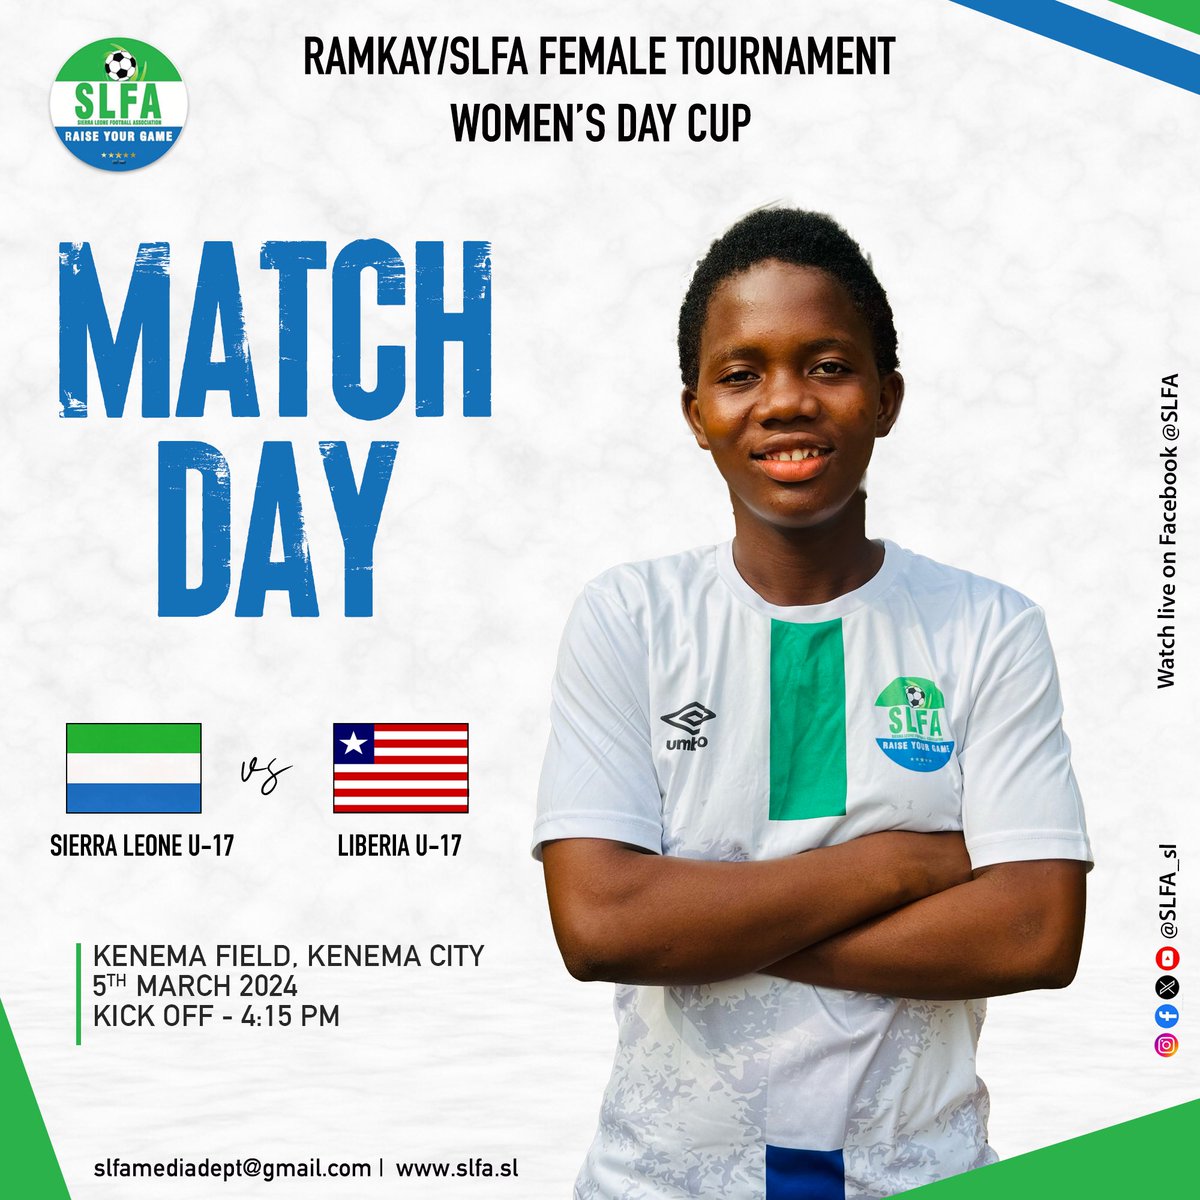 Exciting match ahead for Sierra Leone U17 as they face Liberia in the Women's Day Cup! After a win and a draw, they're aiming for another victory. Let's cheer them on!🙌🏾💪🏽🇸🇱⚽️ #WomenInSports #SierraLeoneU17 #WomensDayCup